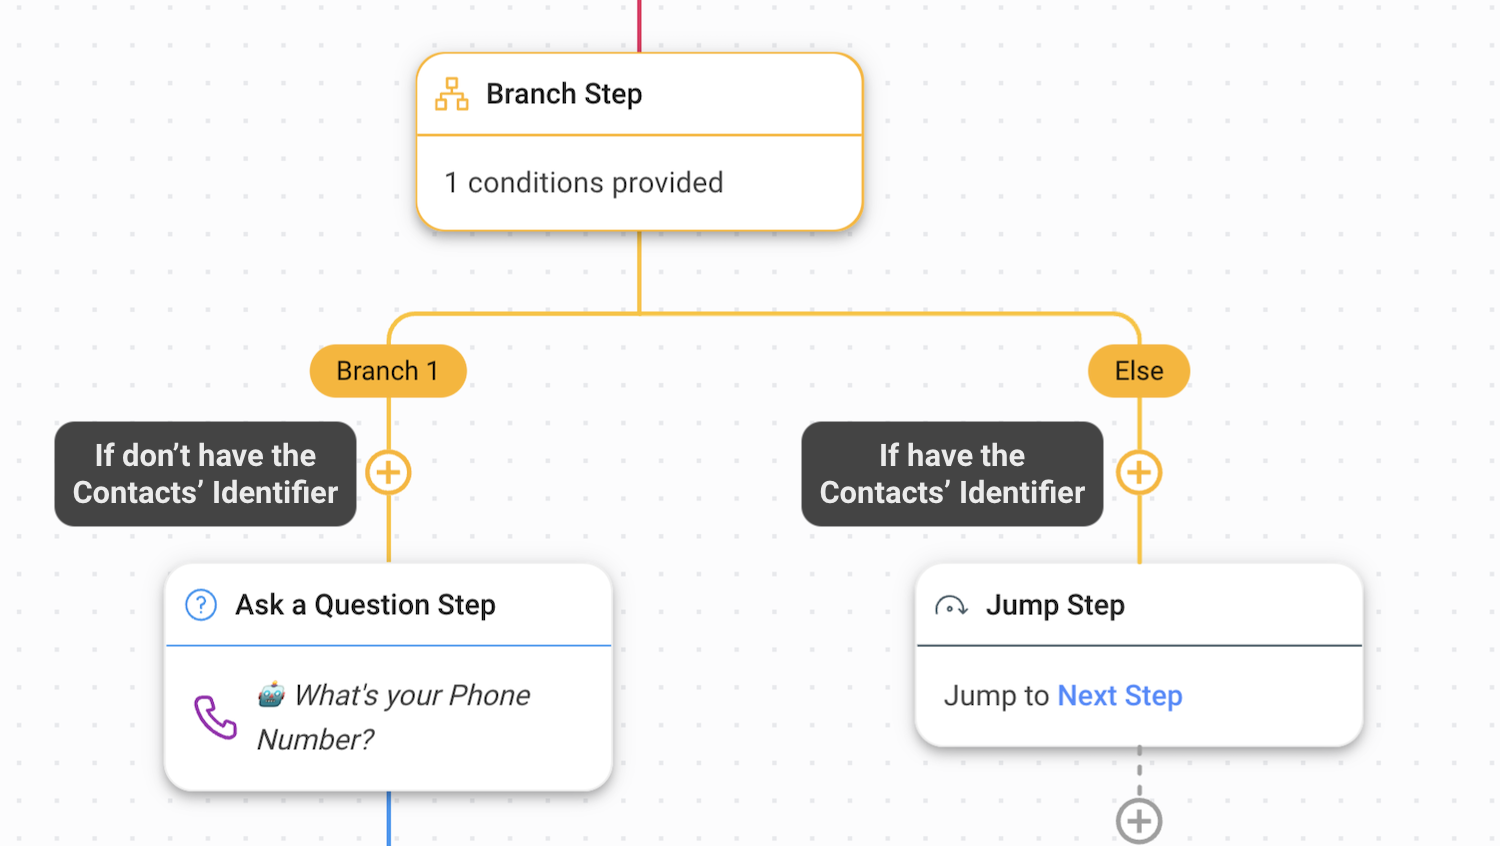 how to use a Workflow to get a Contact’s email address or phone number